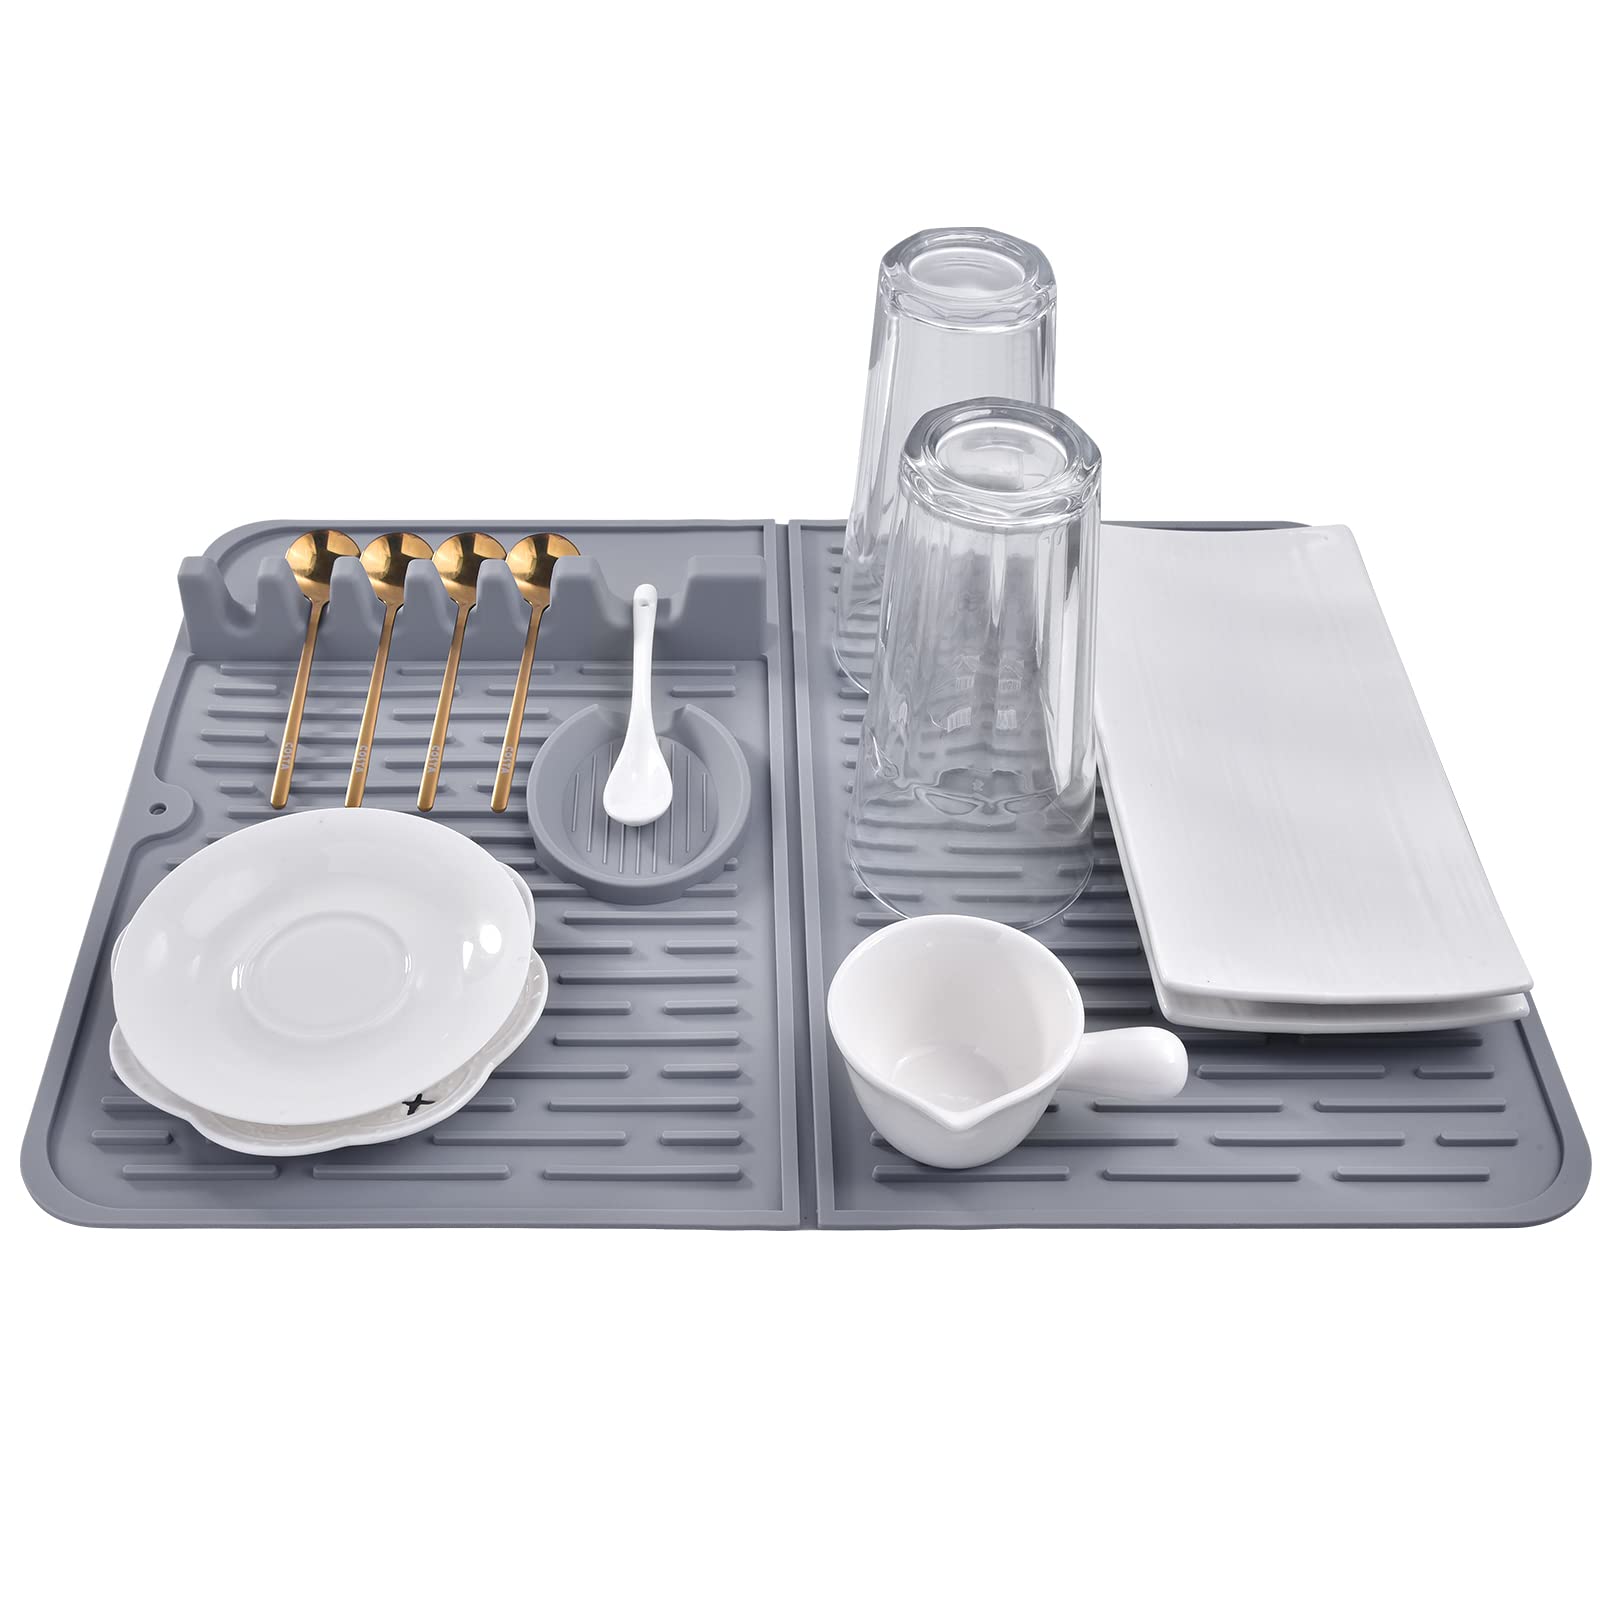 VENMATE Silicone Dish Drying Mats for Kitchen Counter, Heat Resistant Mat, Spoon Rest, Utensil Rest spatula holder with Drip Mat, Sink Mat with Cooking Spoon Holder(Grey(19" x 14"))